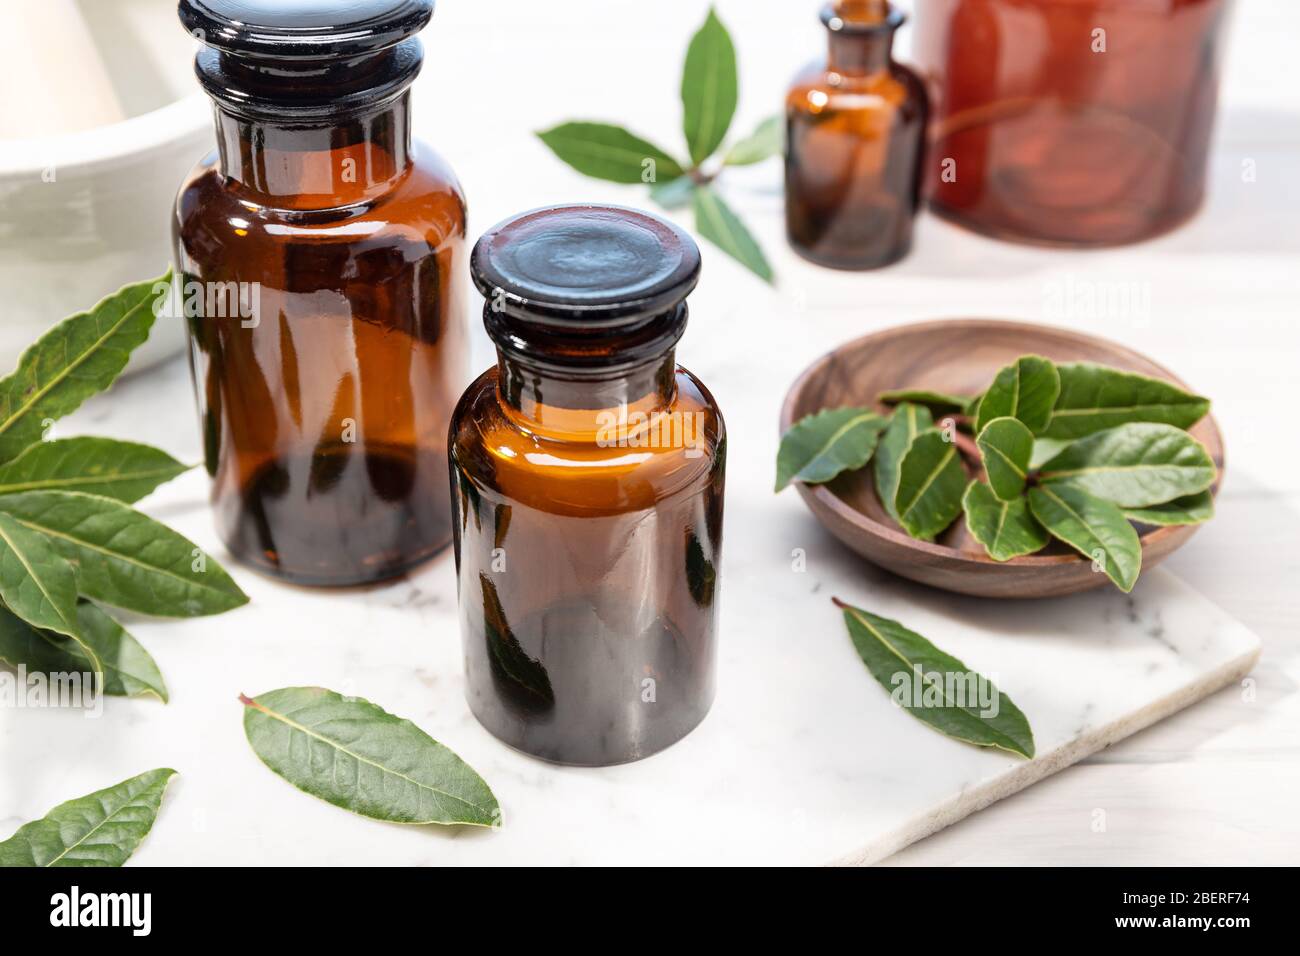 Bay laurel essential oil on vintage apothecary bottle. herbal oil for skin care, aromatherapy and natural medicine Stock Photo